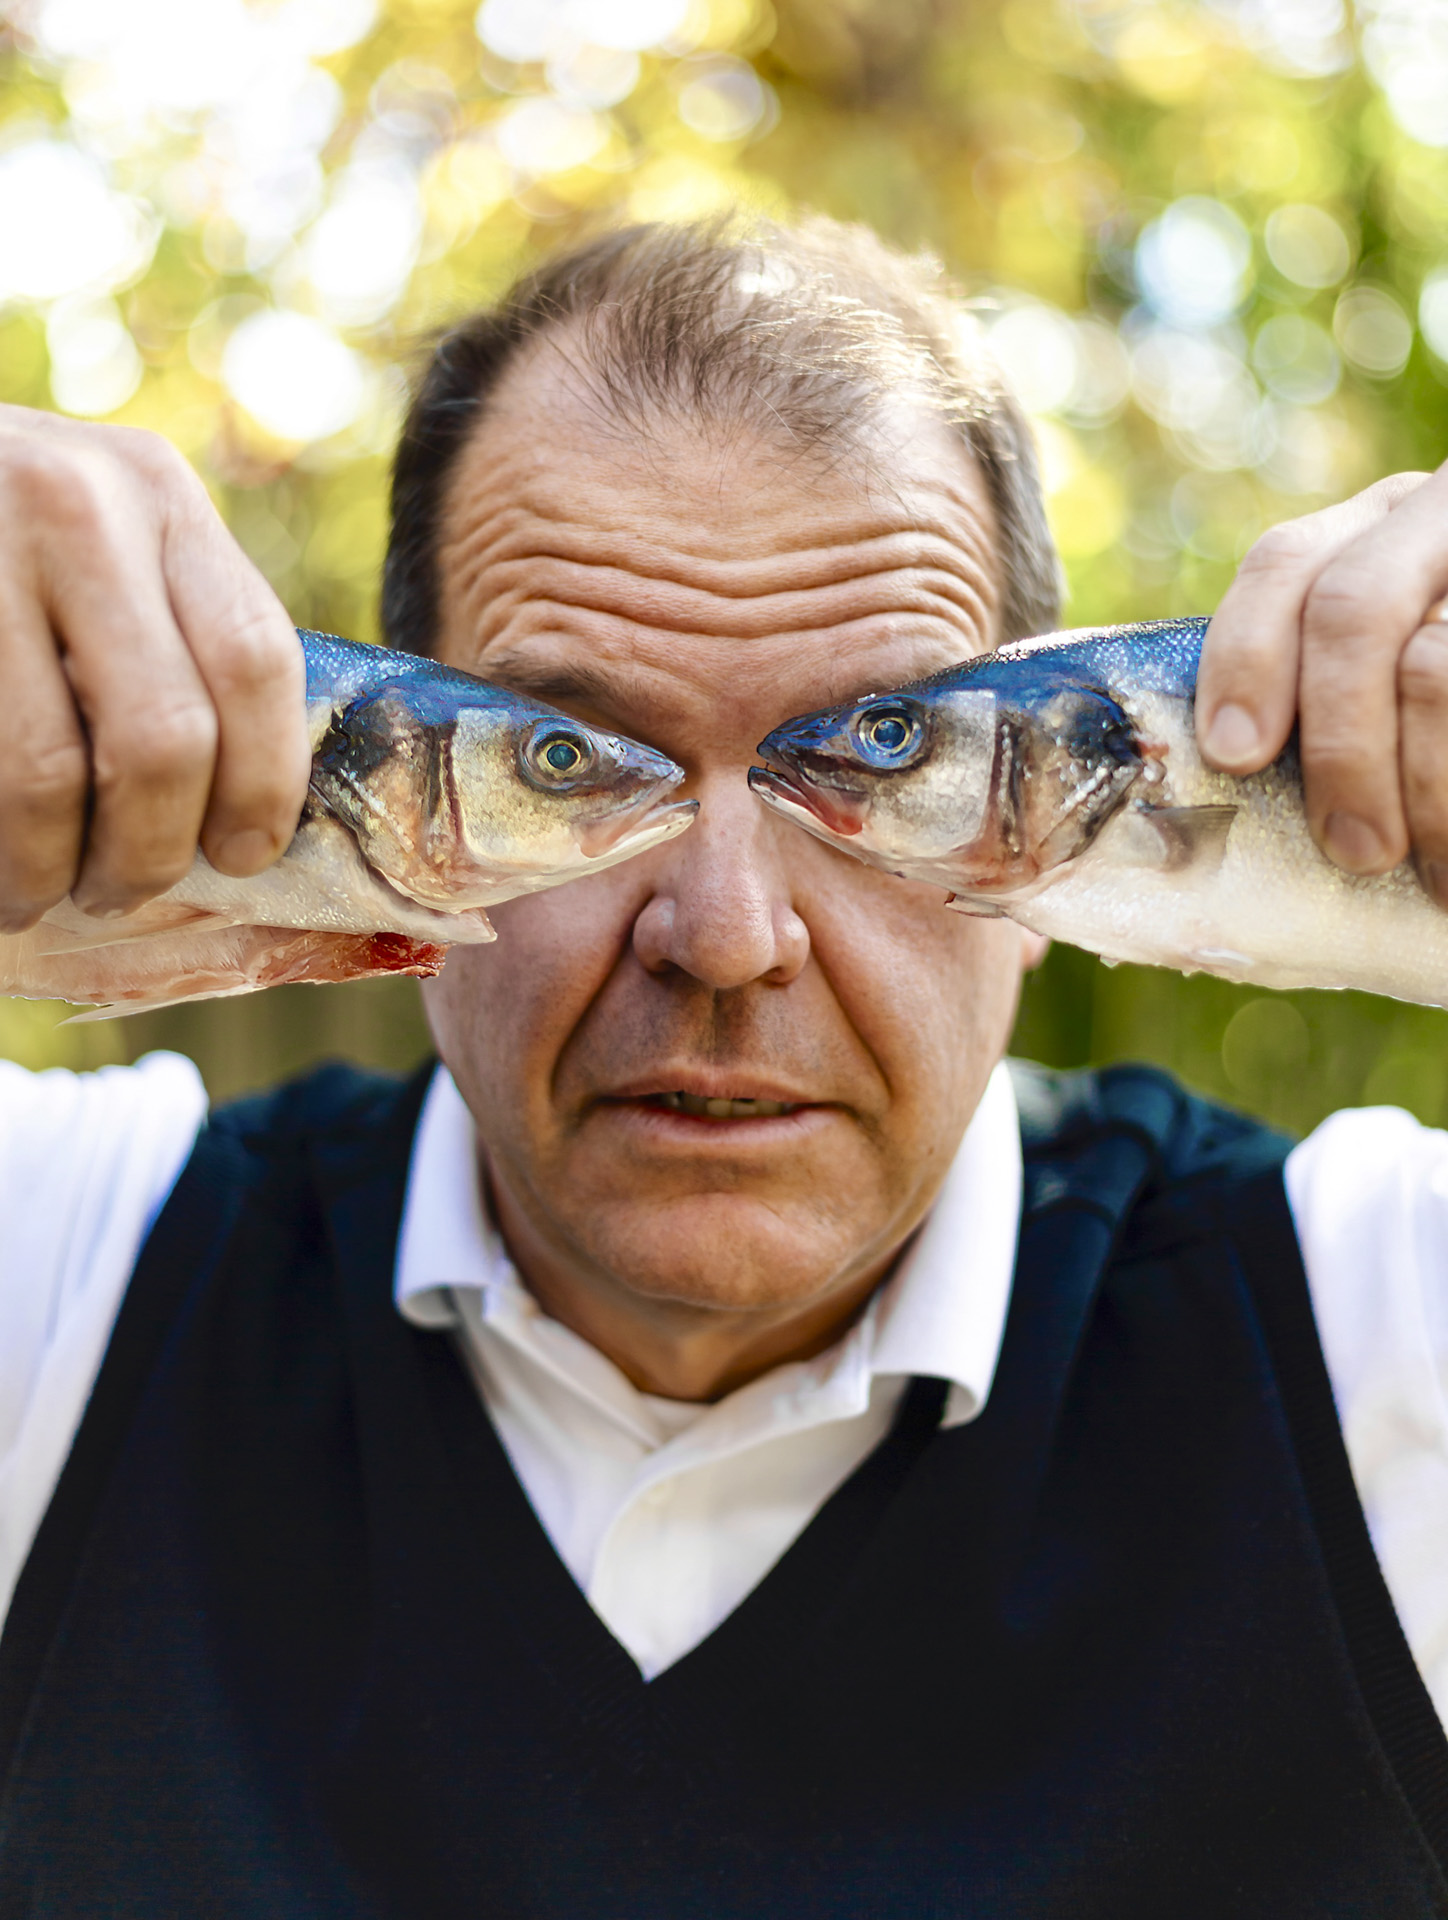 Fish Eyes: A middle-aged, medium-light skinned man is holding a dead fish up to his eyes in each hand. The man is wearing a white collared shirt with a navy blue sweater vest on top, looking directly at the camera.